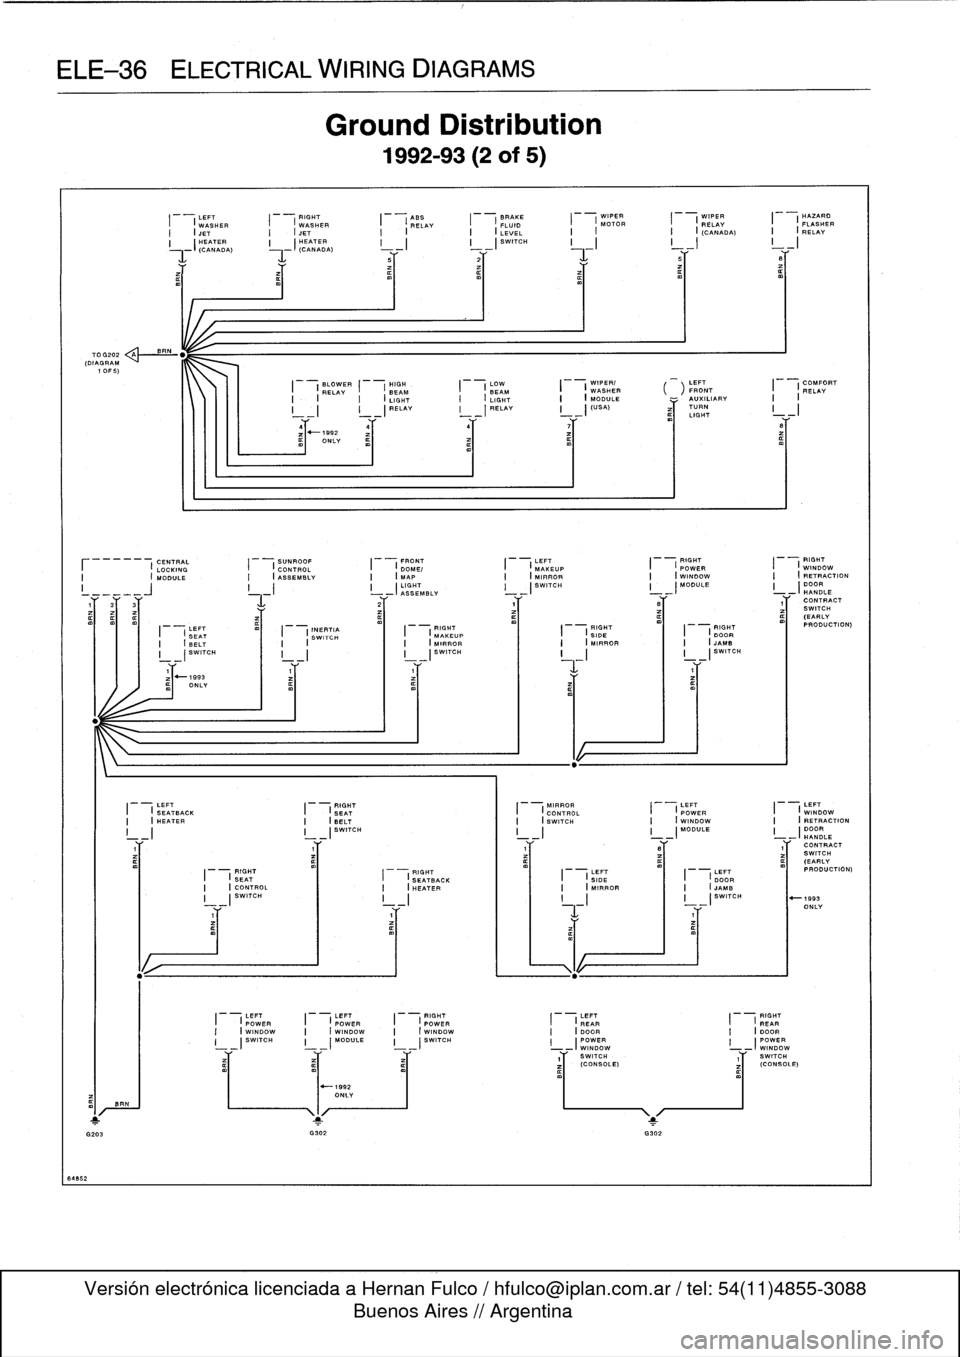 BMW M3 1993 E36 Owners Guide 
ELE-36
ELECTRICAL
WIRING
DIAGRAMS

64852

70G202
(DIAGRAM
1
OF
5)

BR

BRN

LEFT

	

RIGHT

	

ASS

	

BRAKE

	

WIPER

	

WIPER

	

HAZARD
I

	

(
WASHER

	

I

	

(
WASHER

	

I

	

(
RELAY

	

I

